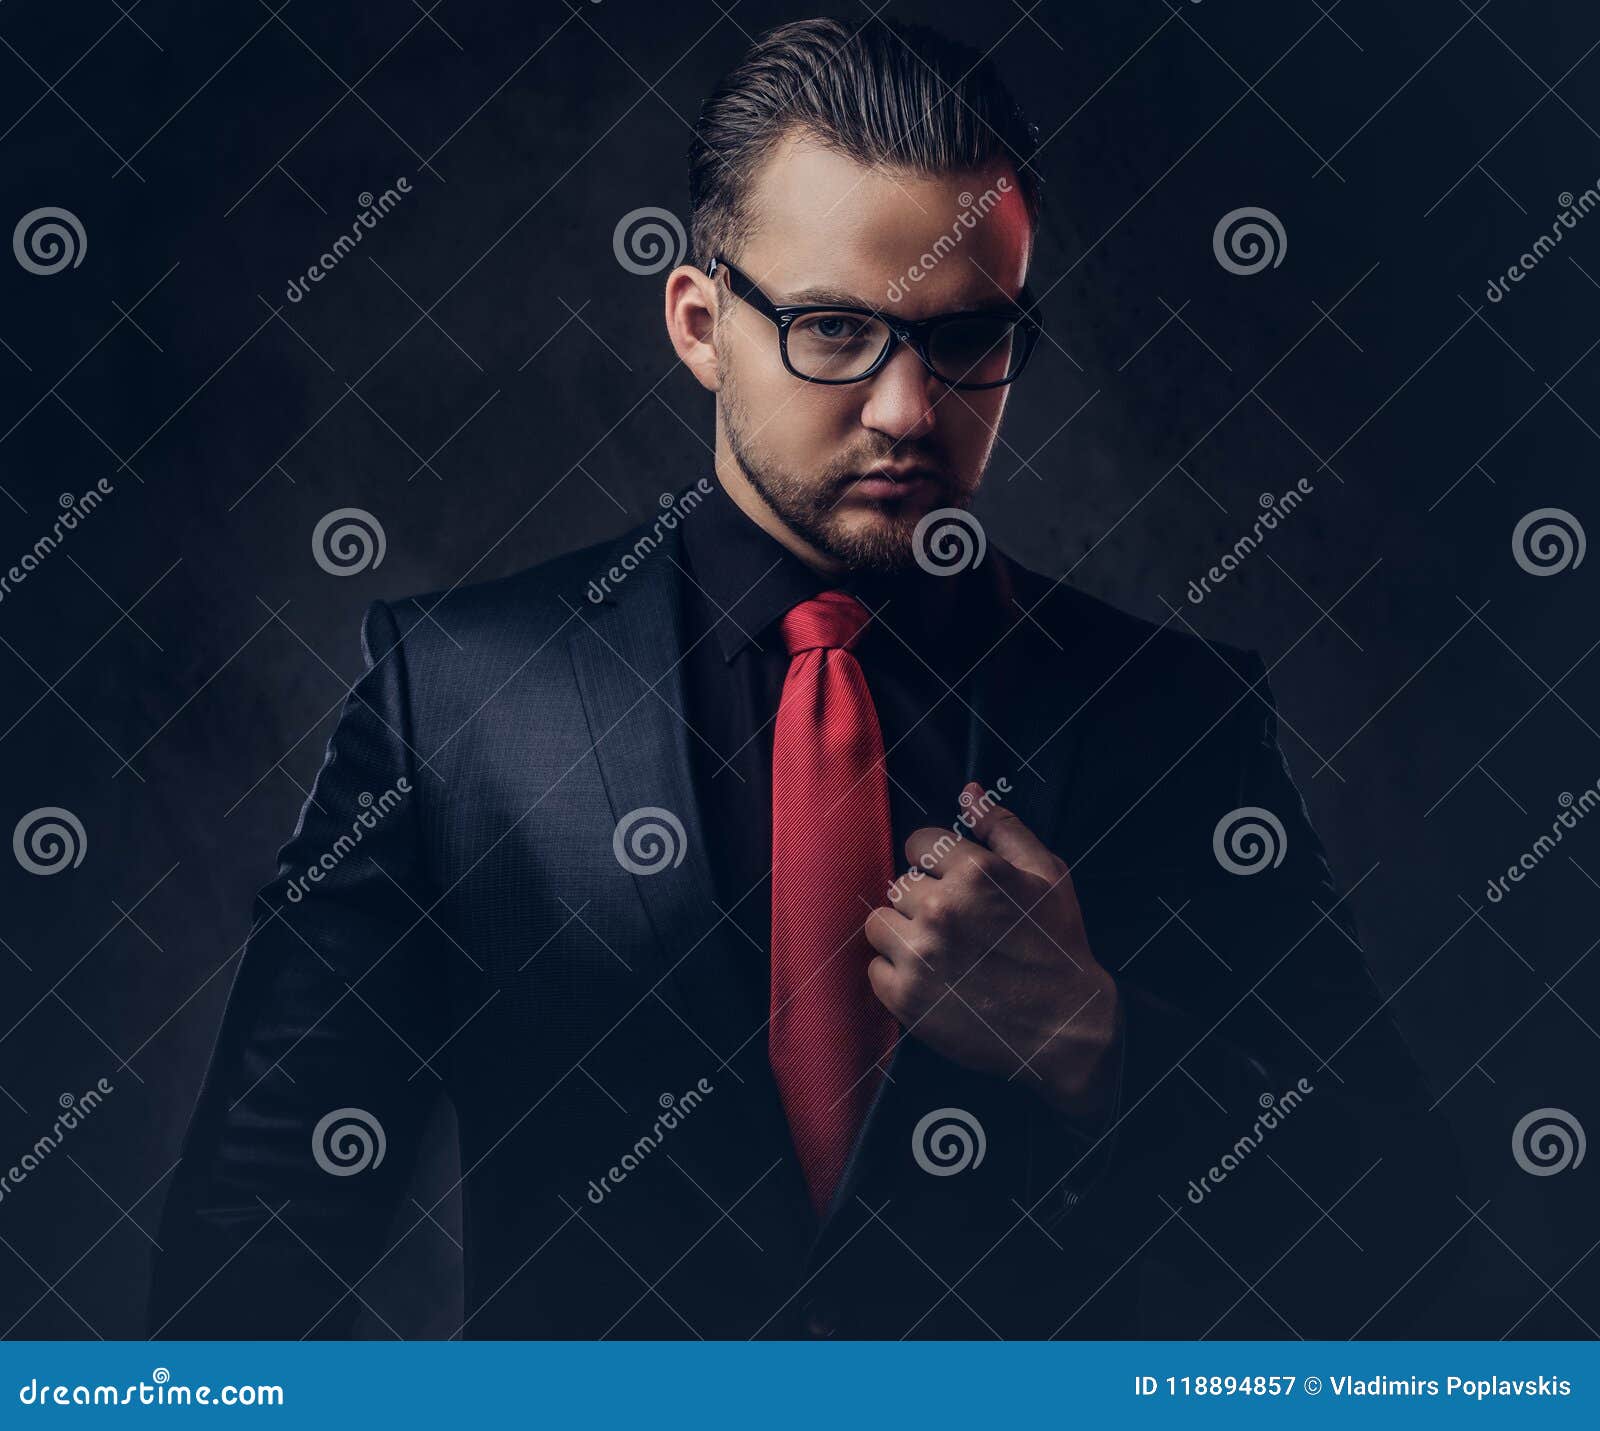 Bustphoto Photography Illustration Red Tie White Shirt Black Suit, Formal  Wear, Business, Mens PNG Transparent Image and Clipart for Free Download